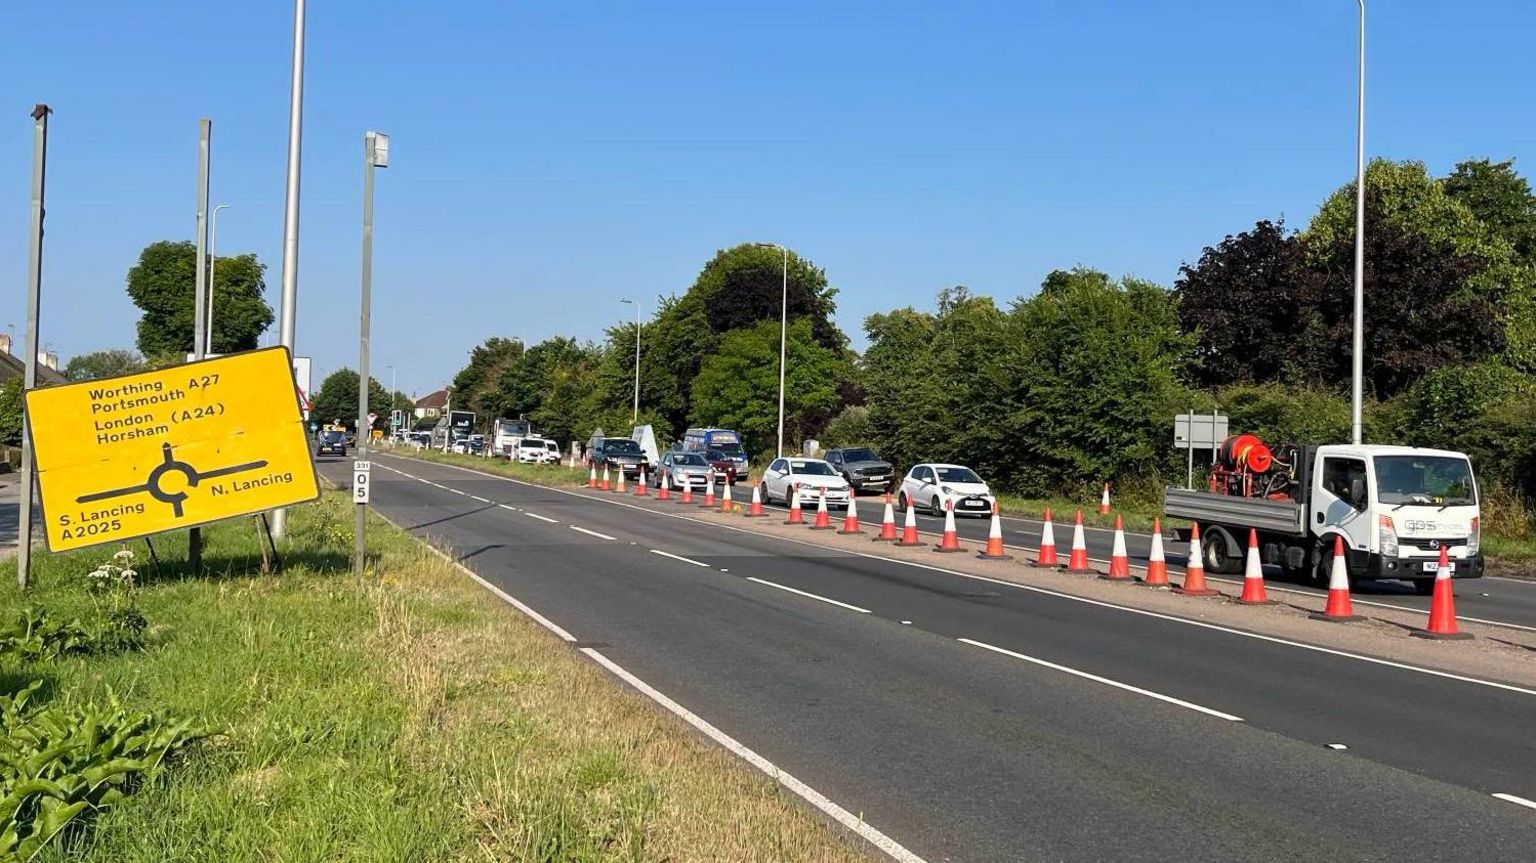 Traffic queueing on the A27 near Worthing